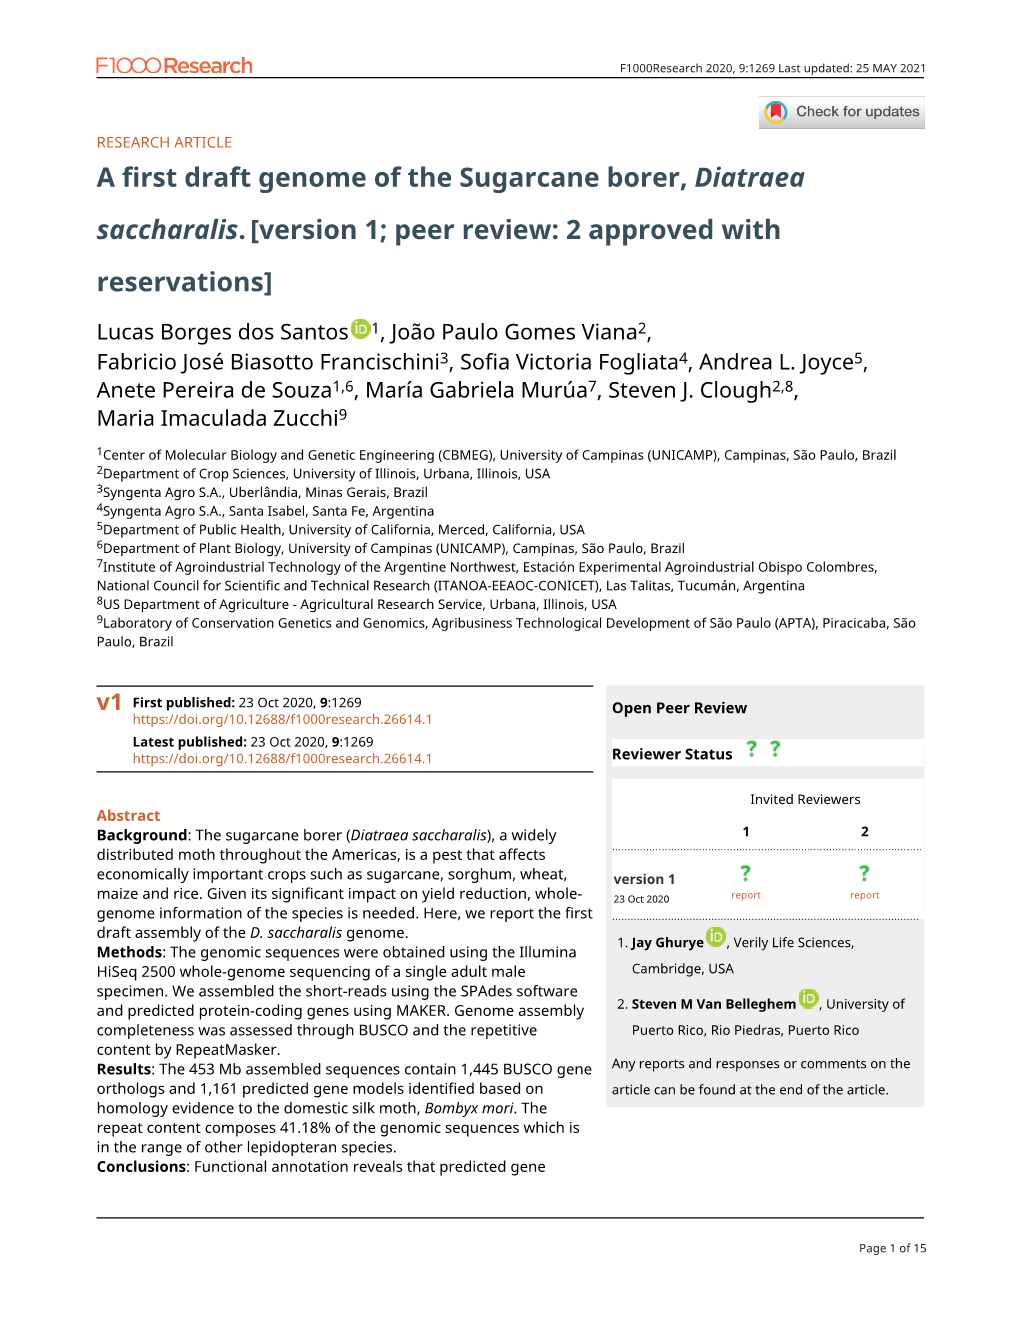 A First Draft Genome of the Sugarcane Borer, Diatraea Saccharalis.[Version 1; Peer Review: 2 Approved with Reservations]